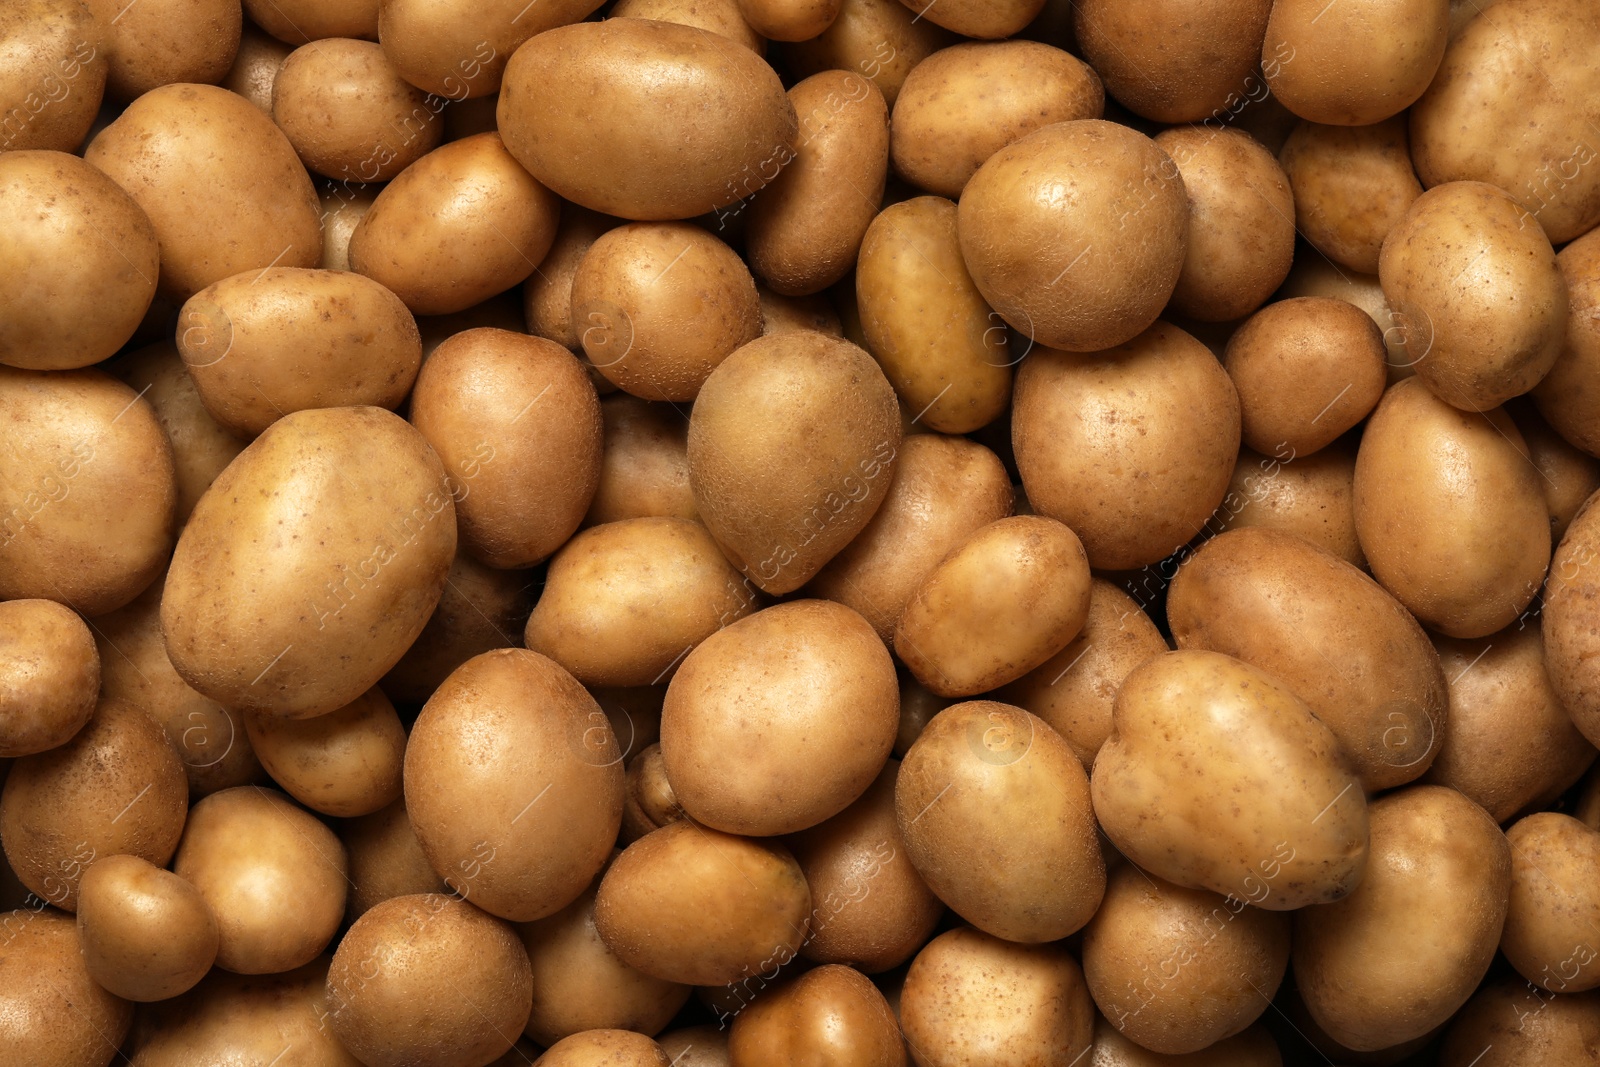 Photo of Raw fresh organic potatoes as background, top view